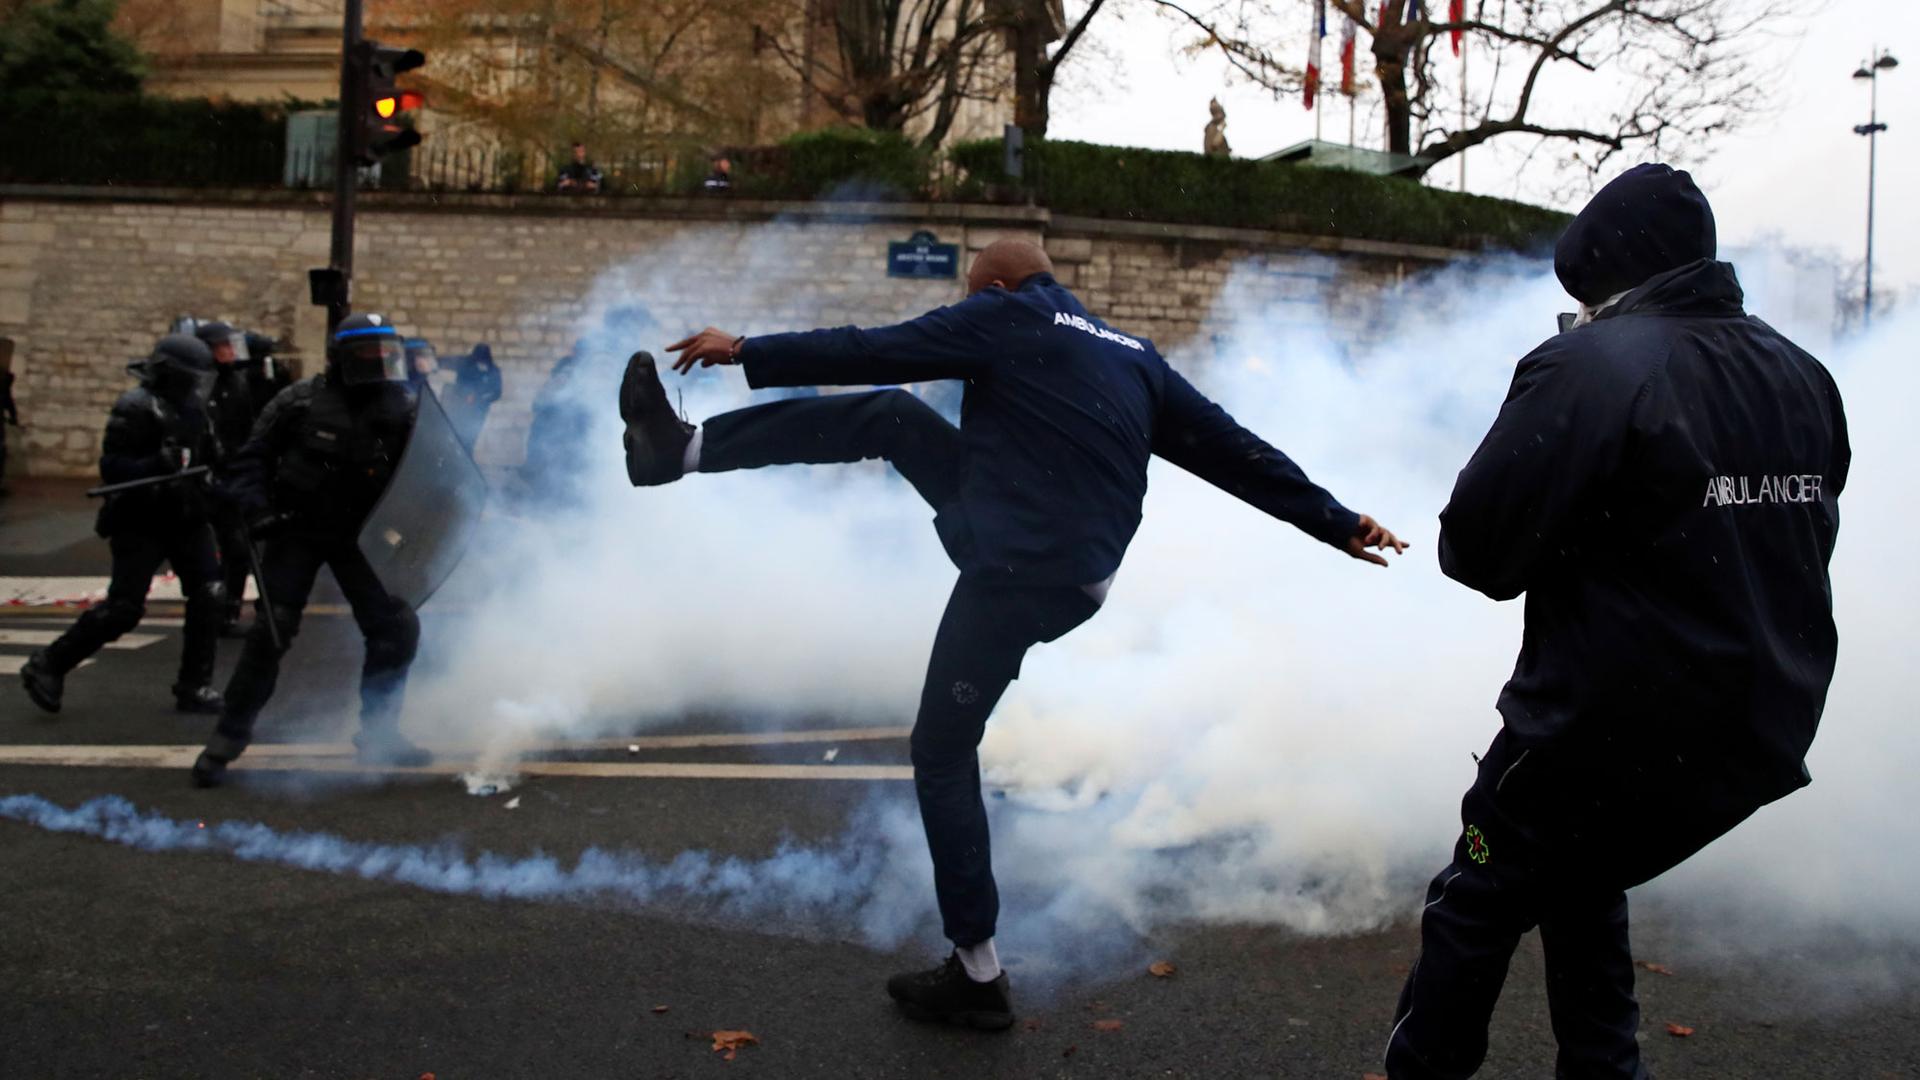 An ambulance driver in France is shown kicking a can of smoke with French riot police in the background.